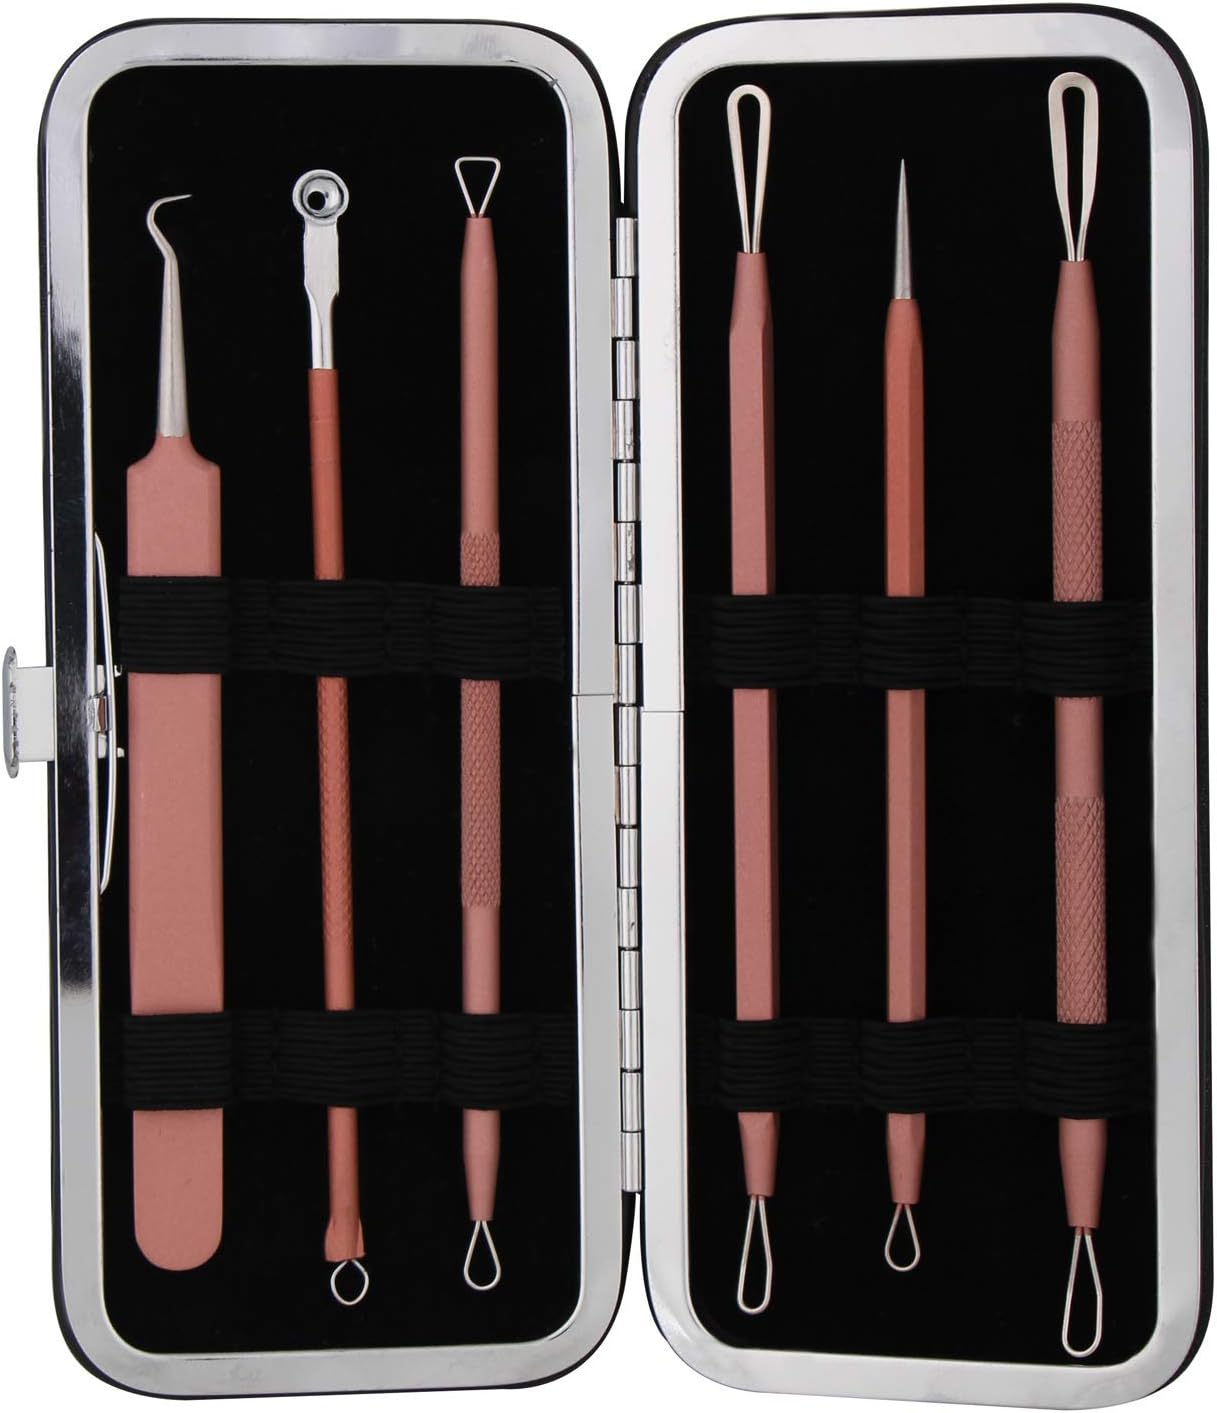 Blackhead Remover Tool Comedones Extractor Acne Removal Kit for Blemish, Whitehead Popping, 6 Pcs Zit Removing for Nose Face Tools with a Leather Bag